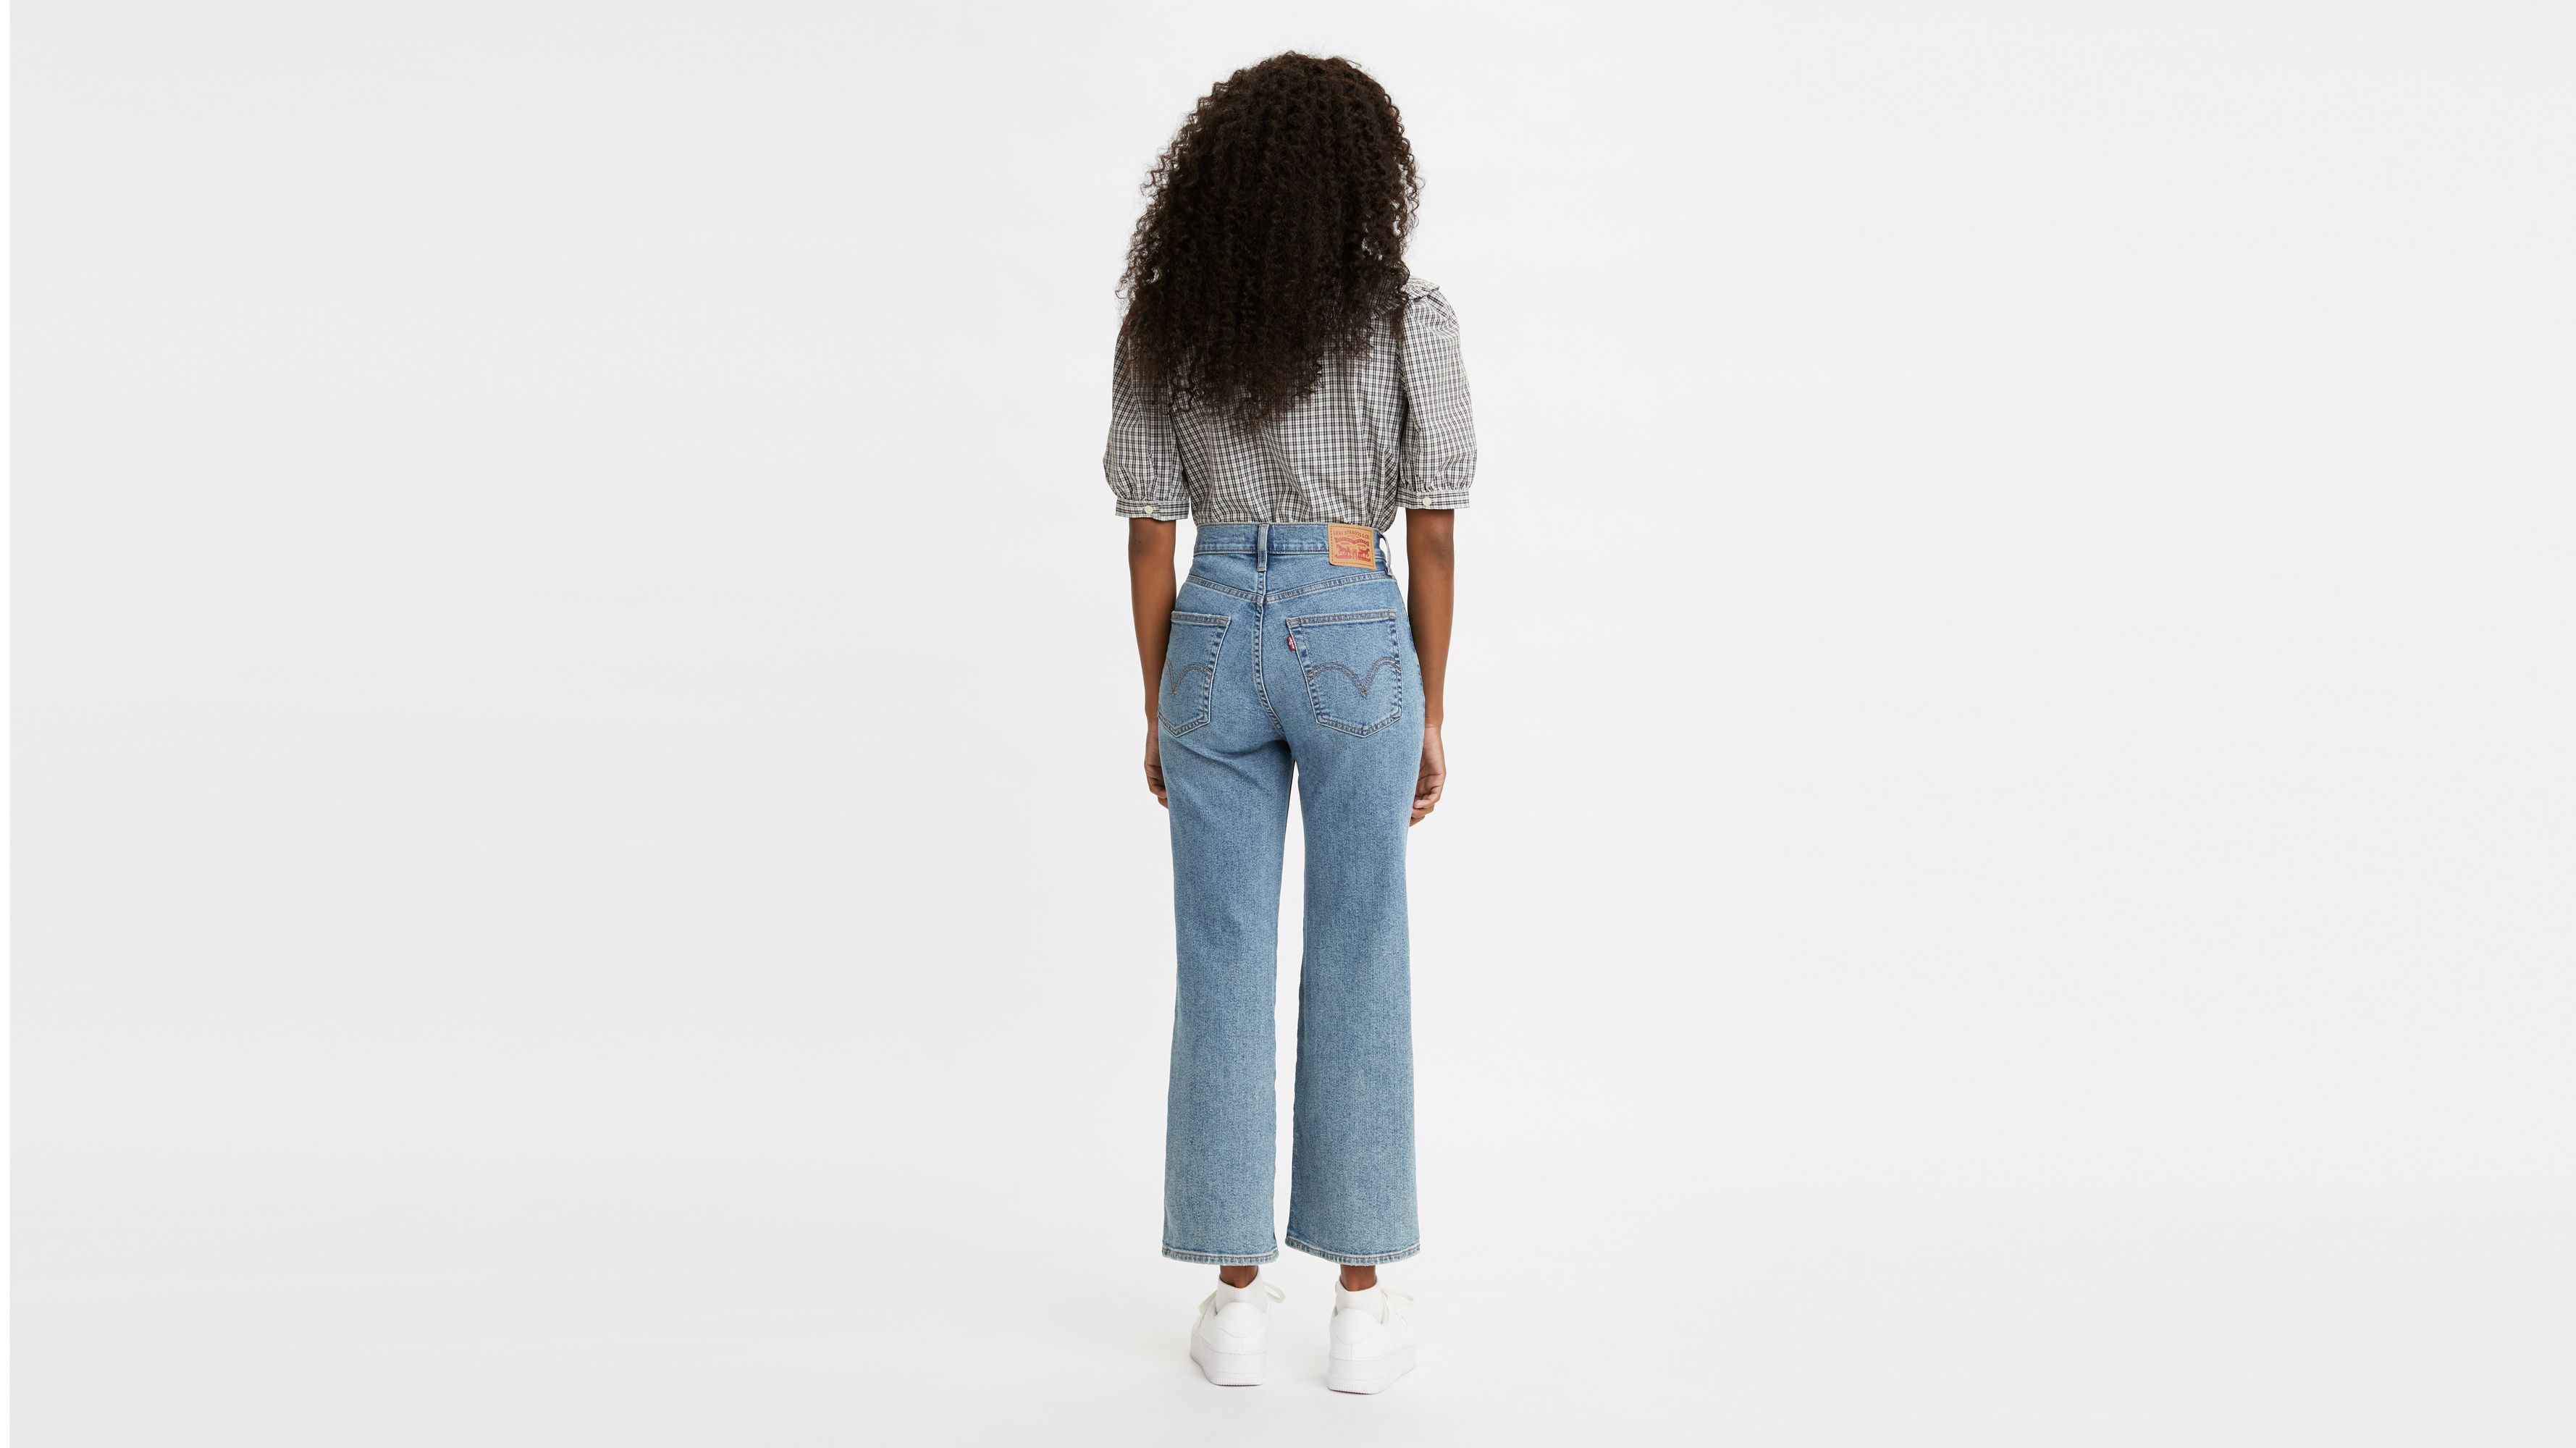 7 Rules for Wearing Cropped Flare Jeans  Cropped flare jeans, Cropped jeans  outfit, Cropped flare pants